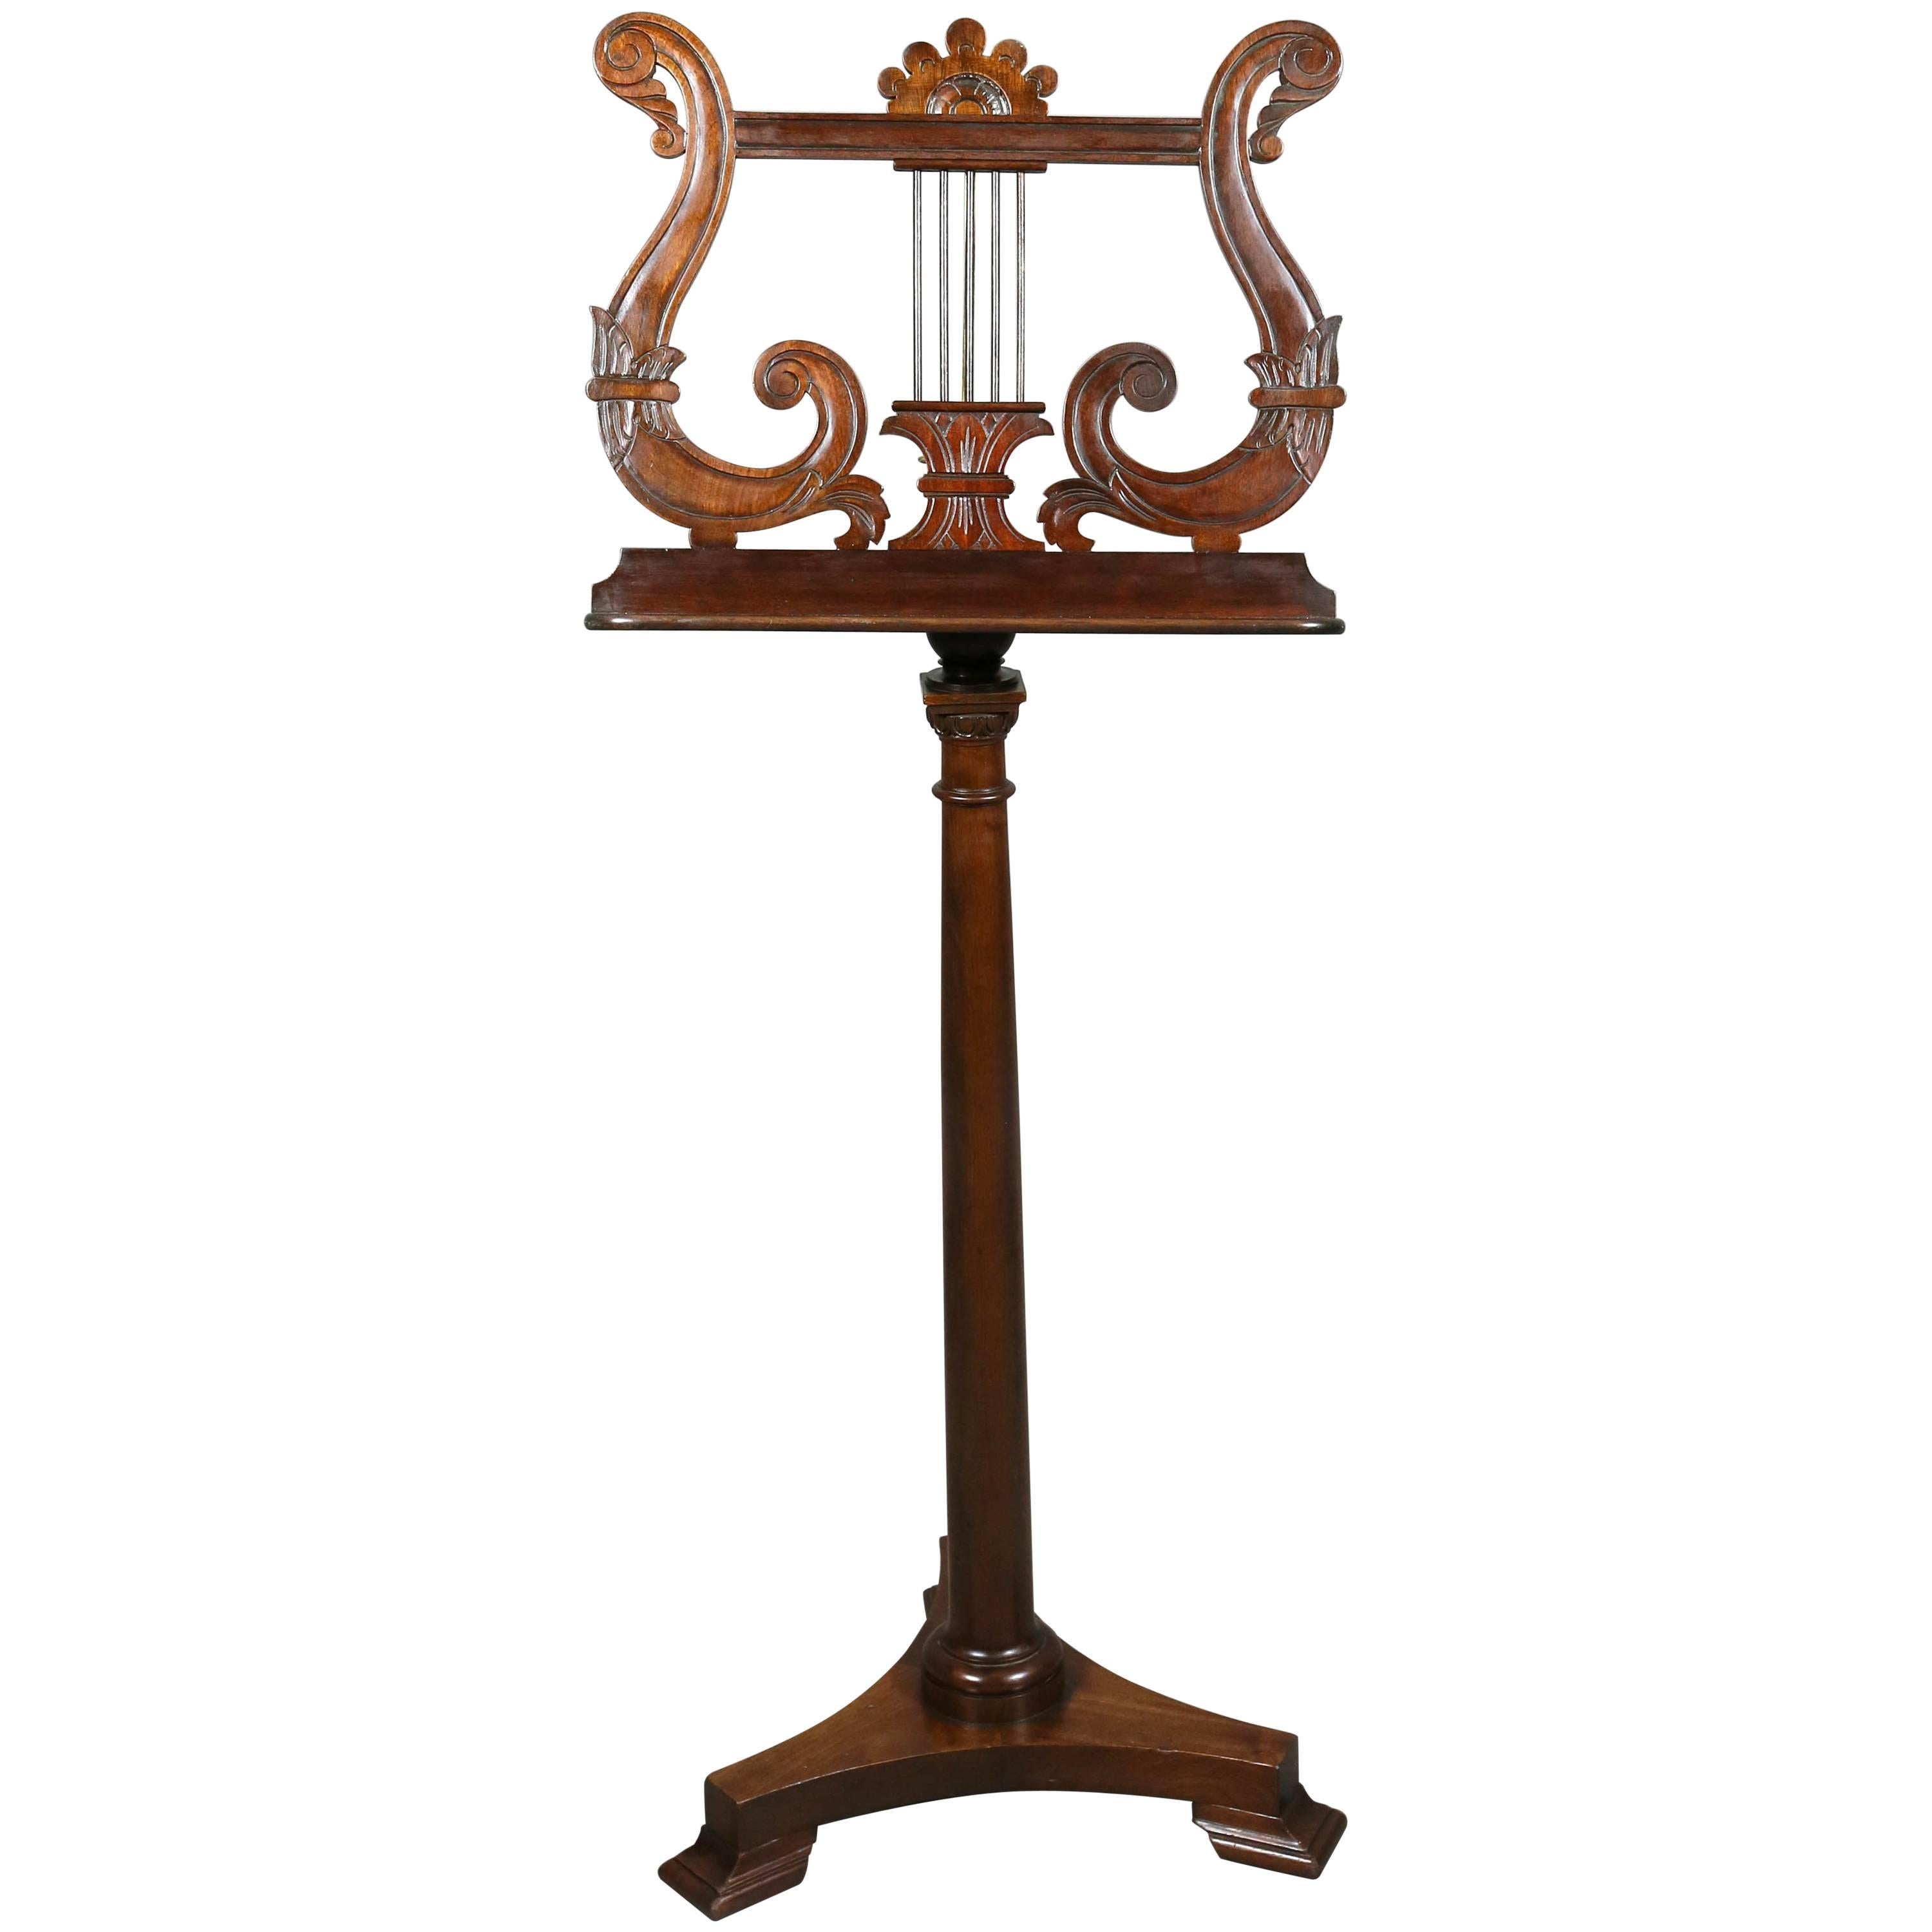 American Classical Revival Mahogany Music Stand